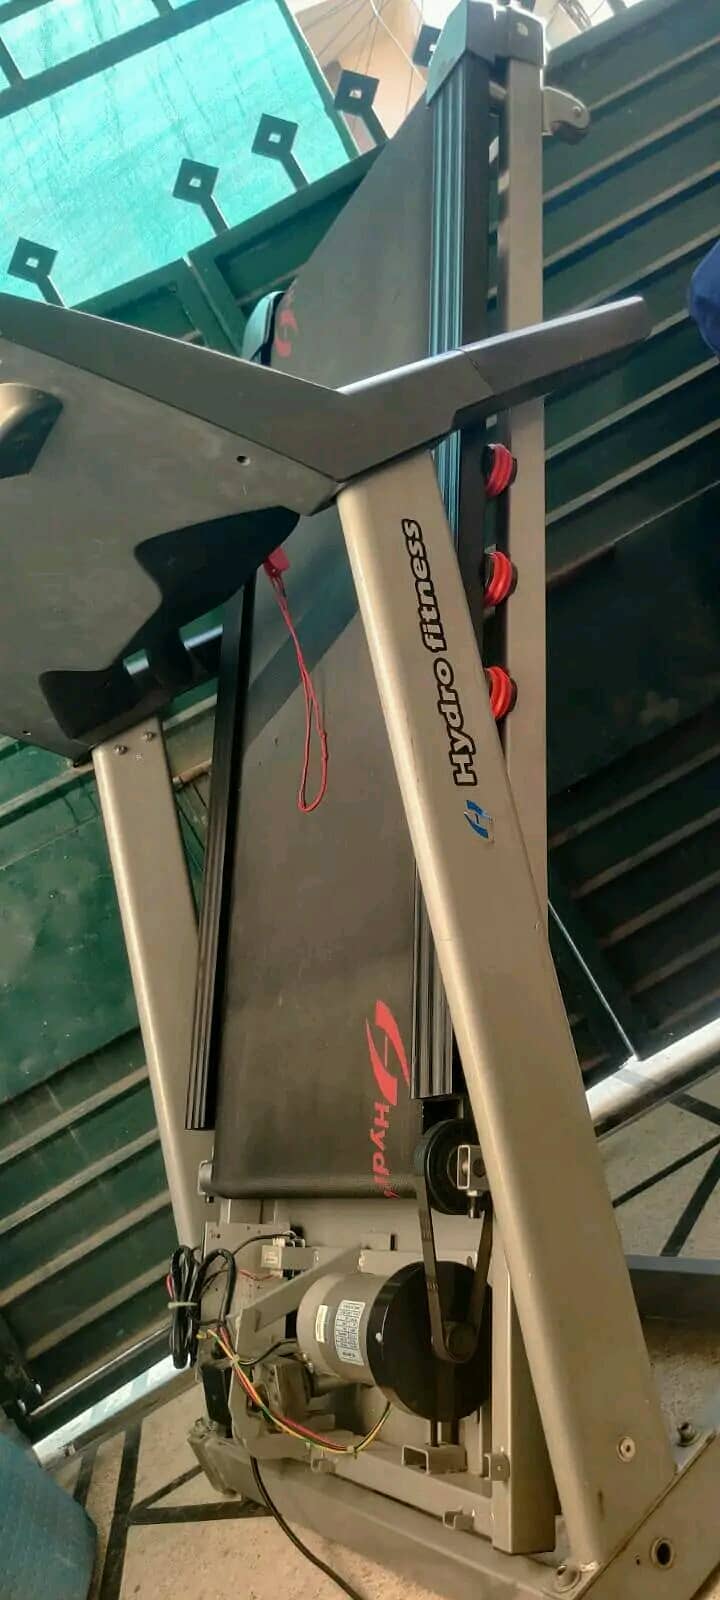 Hydro fitness electrical treadmill 0316/1736/128 whasapp 3